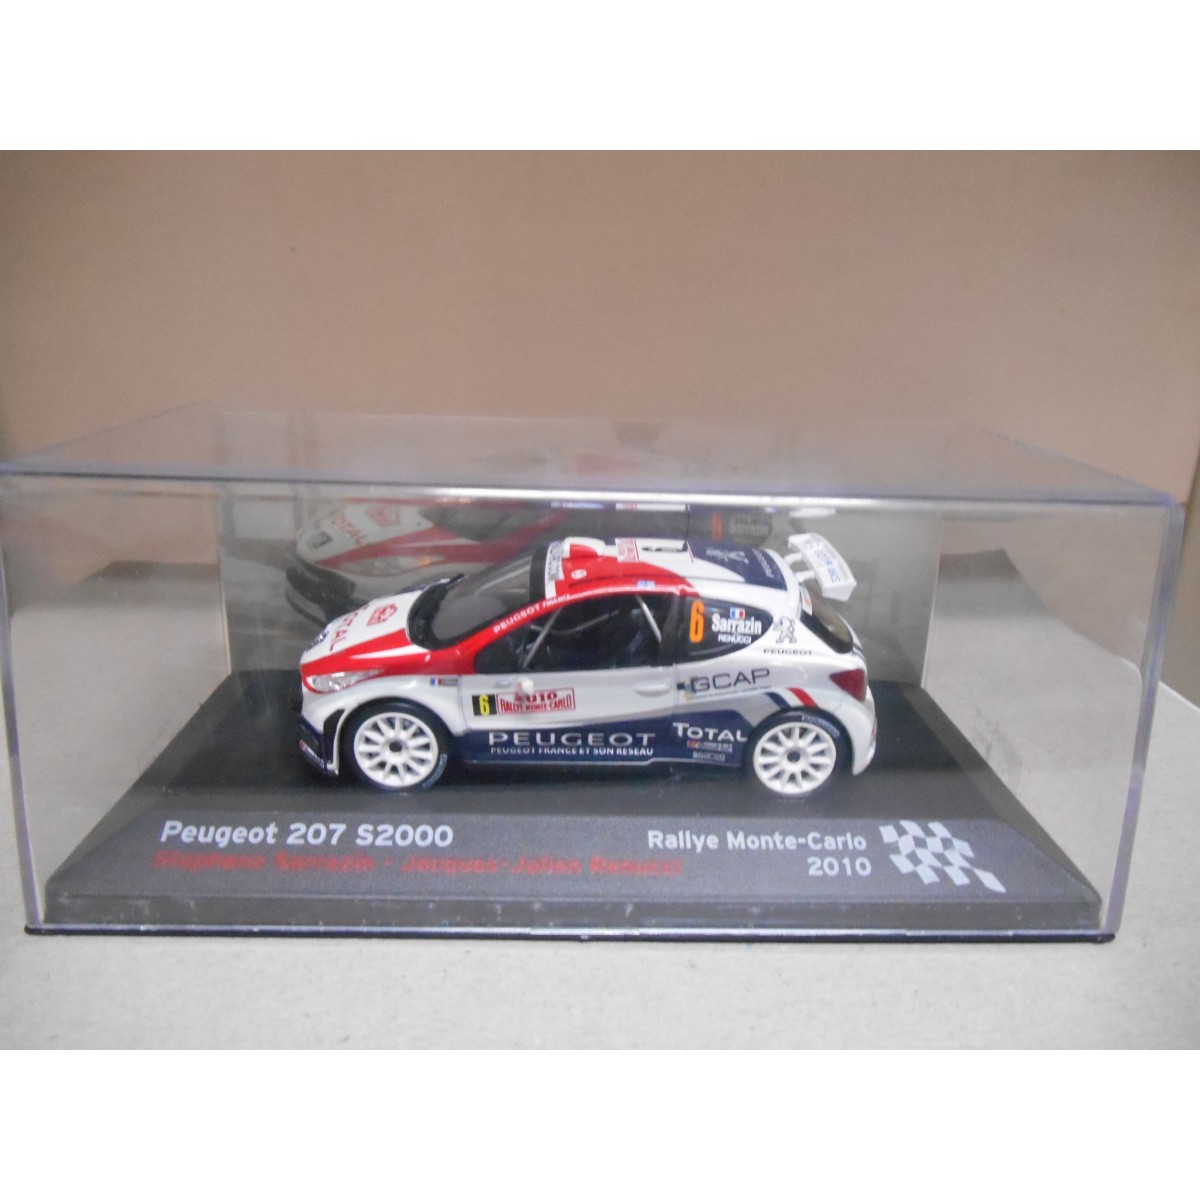 DIE CAST " PEUGEOT 207 S2000 RALLY MONTE CARLO 2010 " SCALA 1/43 